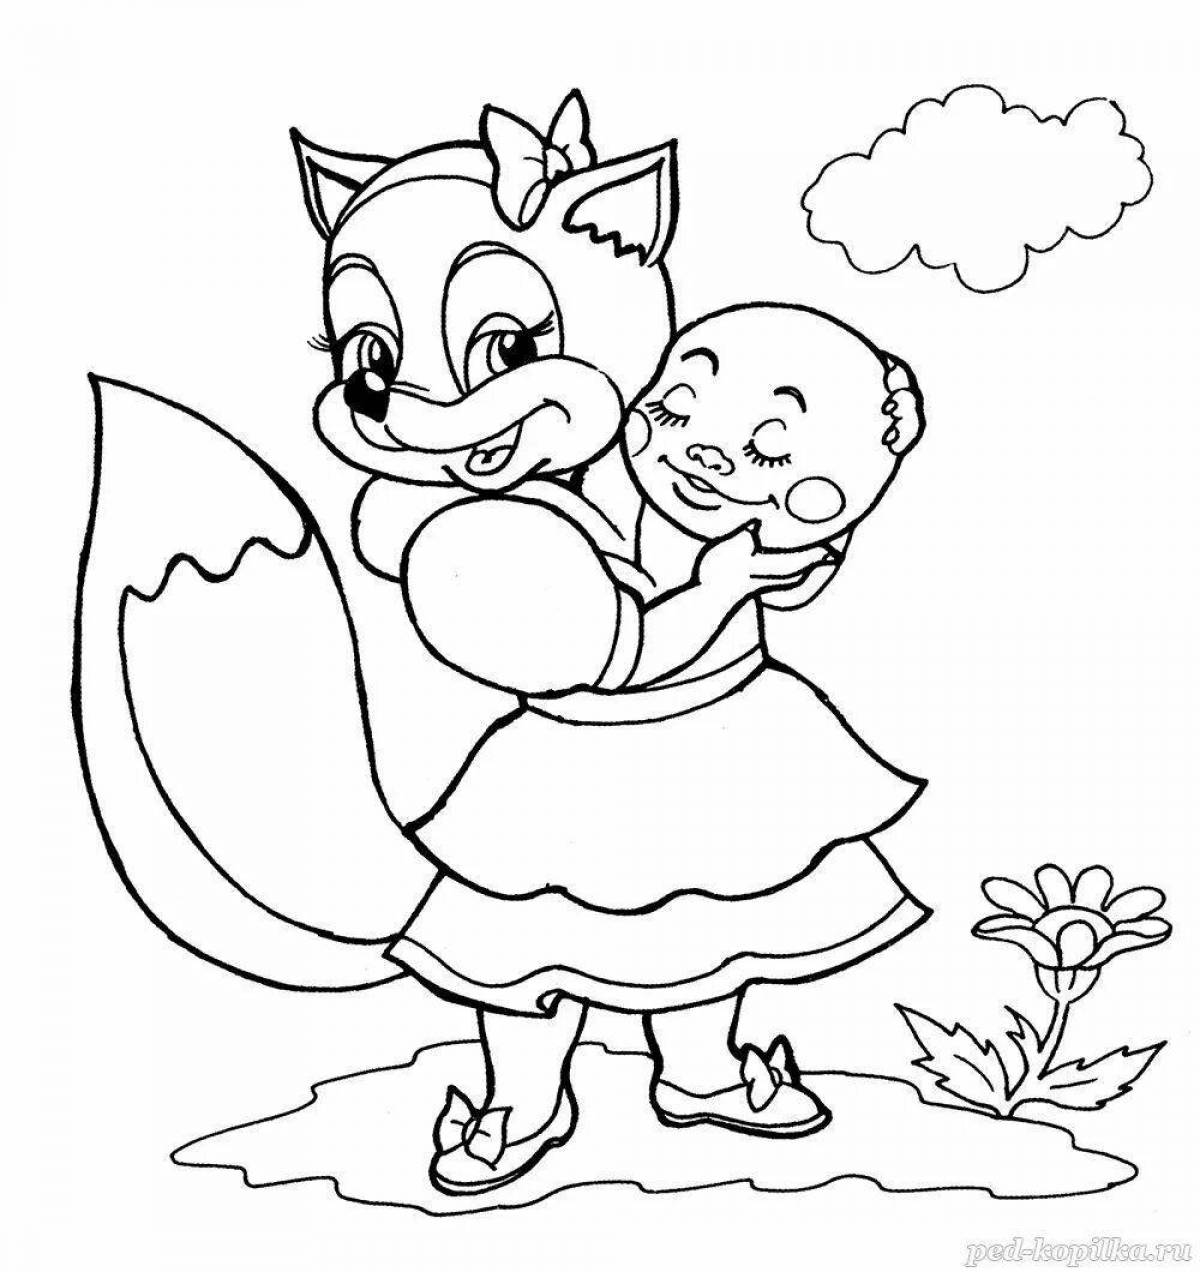 Fun coloring fox for children 4-5 years old